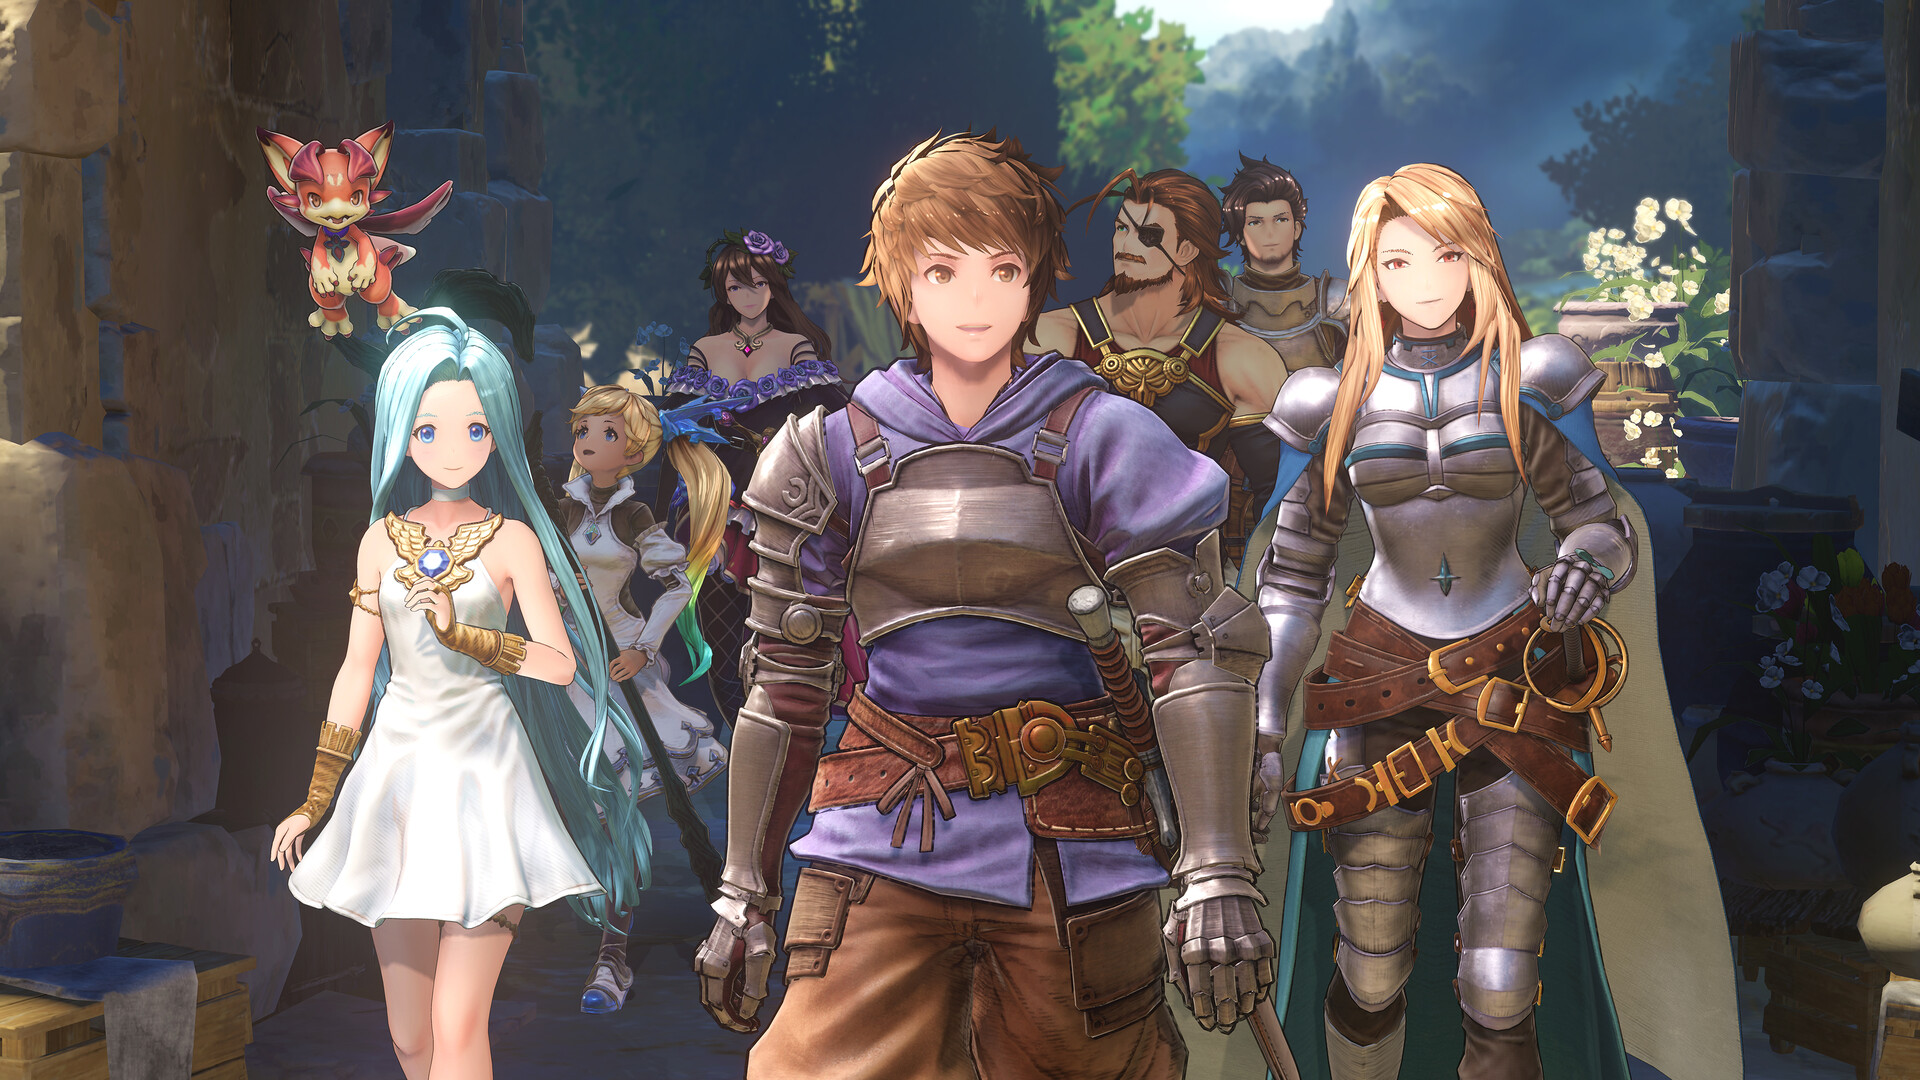 Anime and action come to life in Granblue Fantasy: Versus